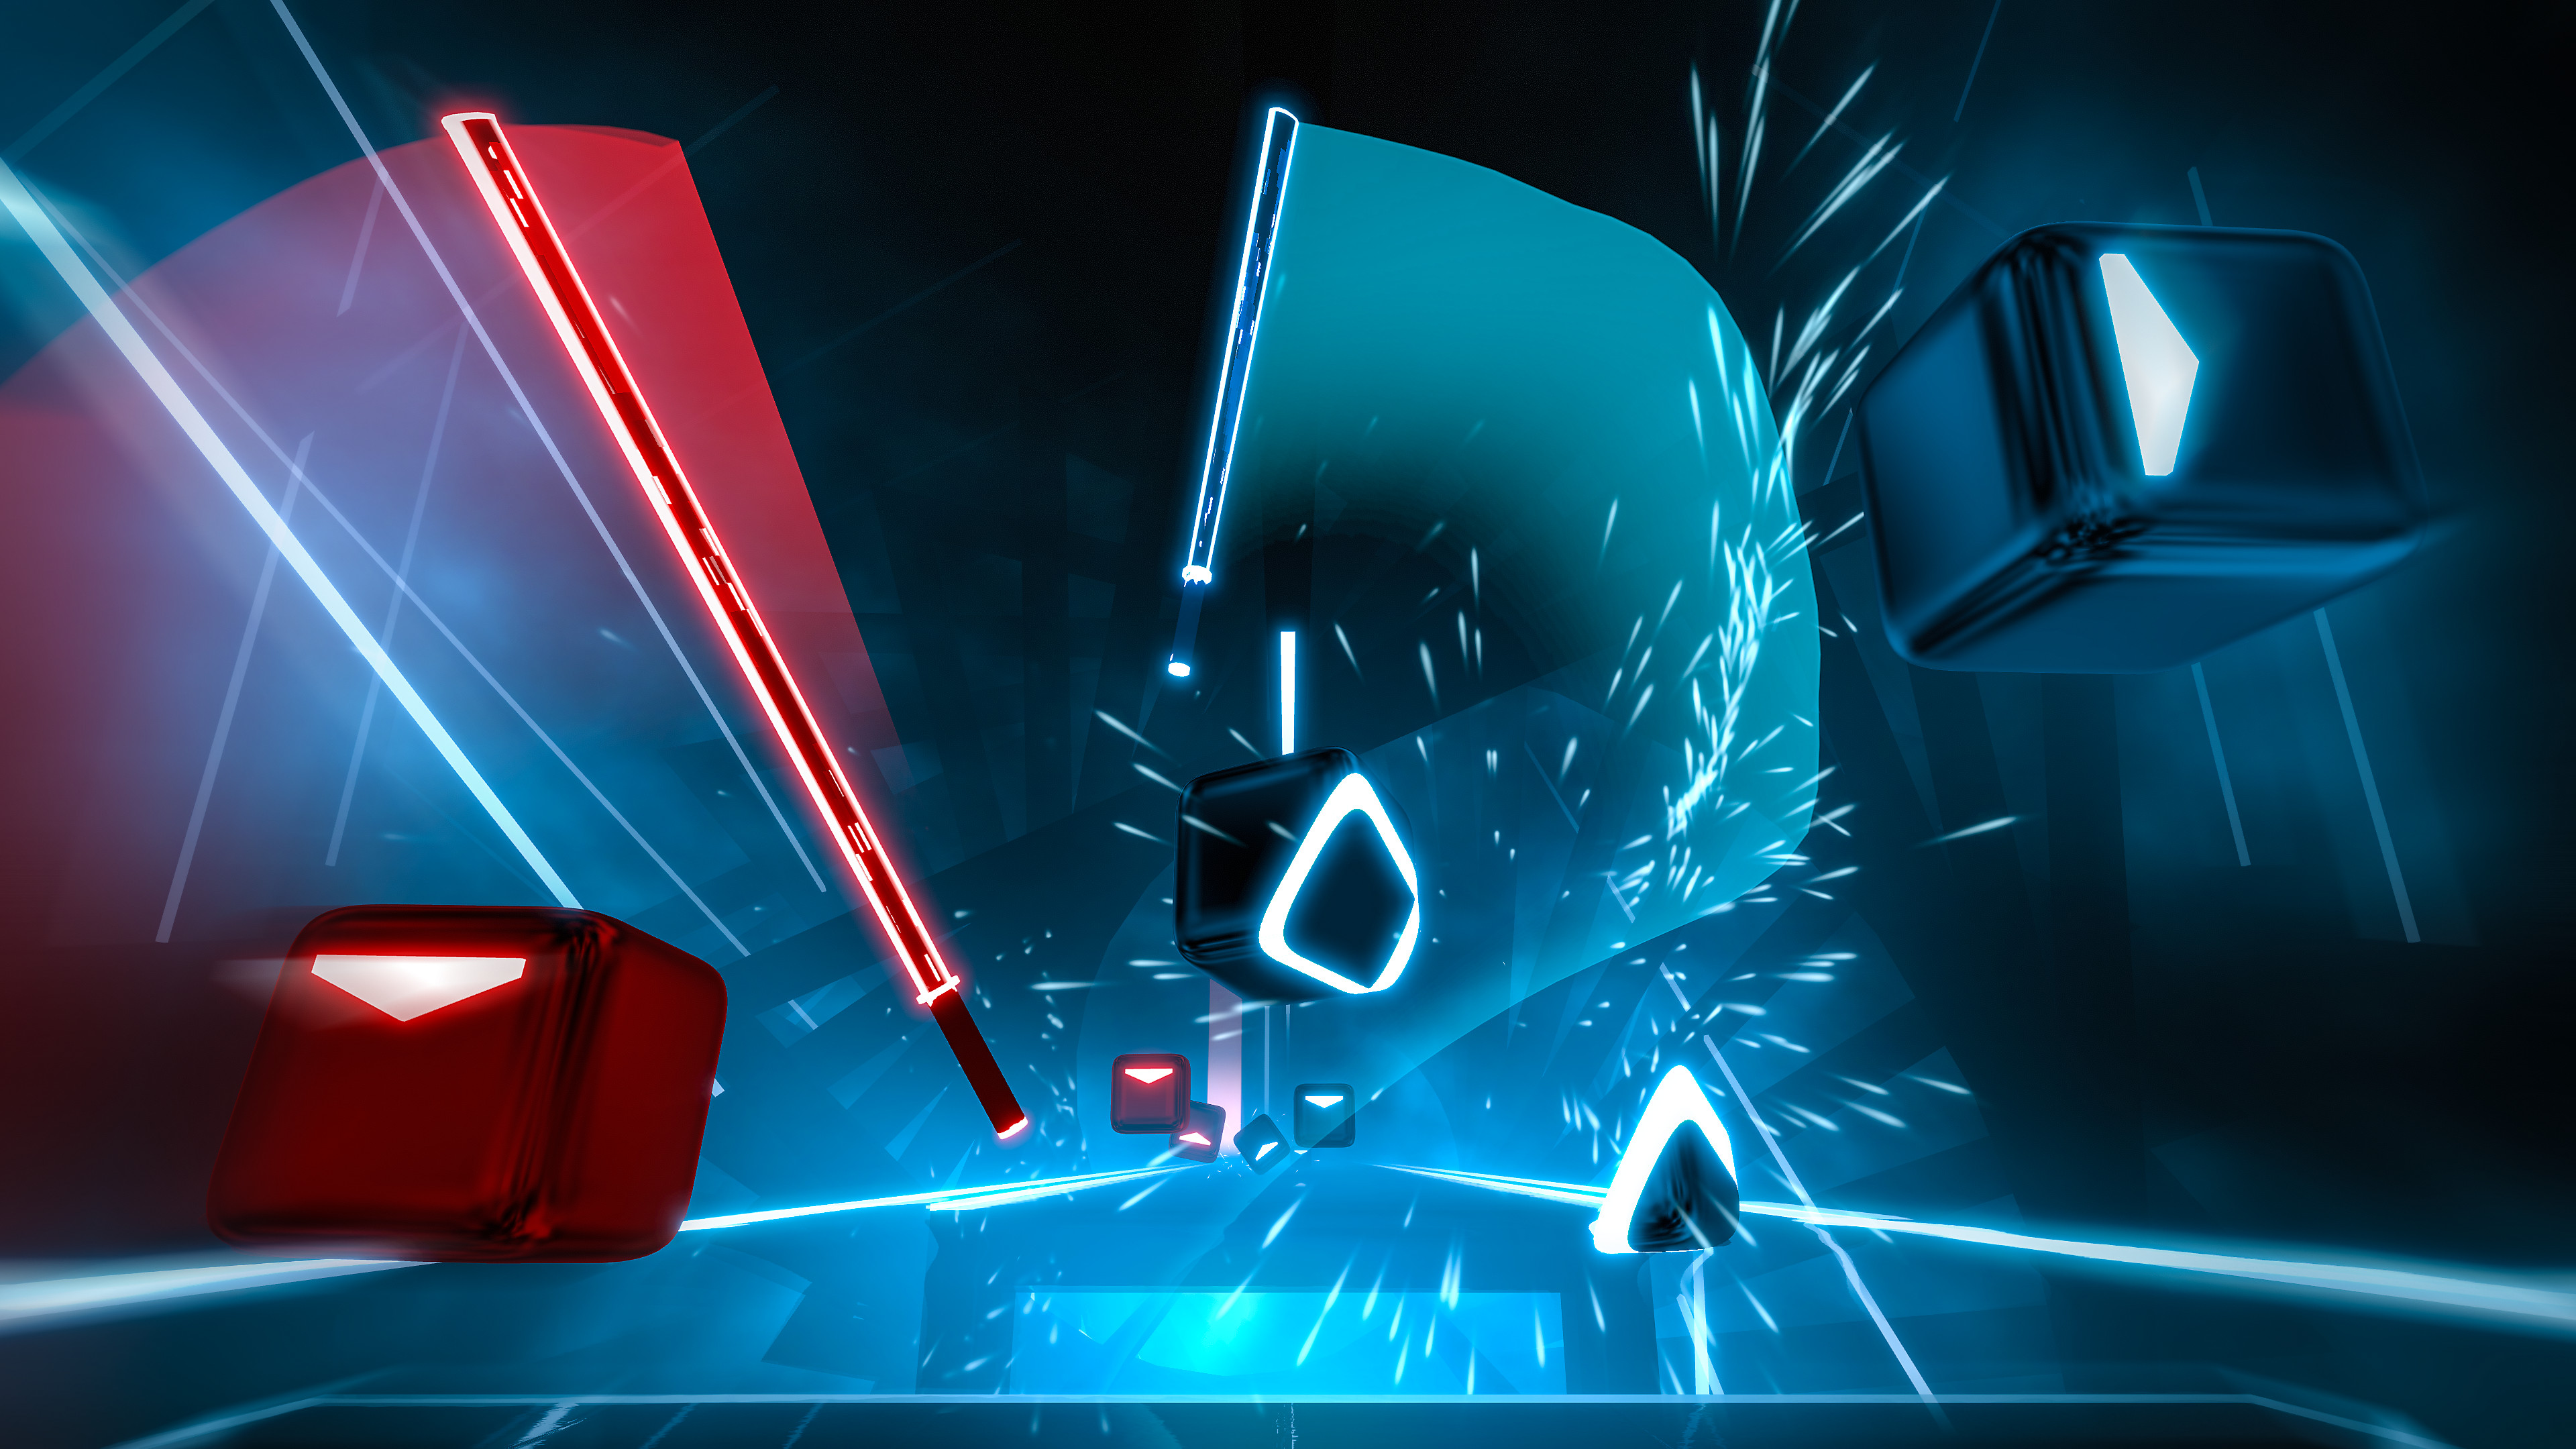 Beat Saber - a still from gameplay depicts a player slashing blocks with their sabers